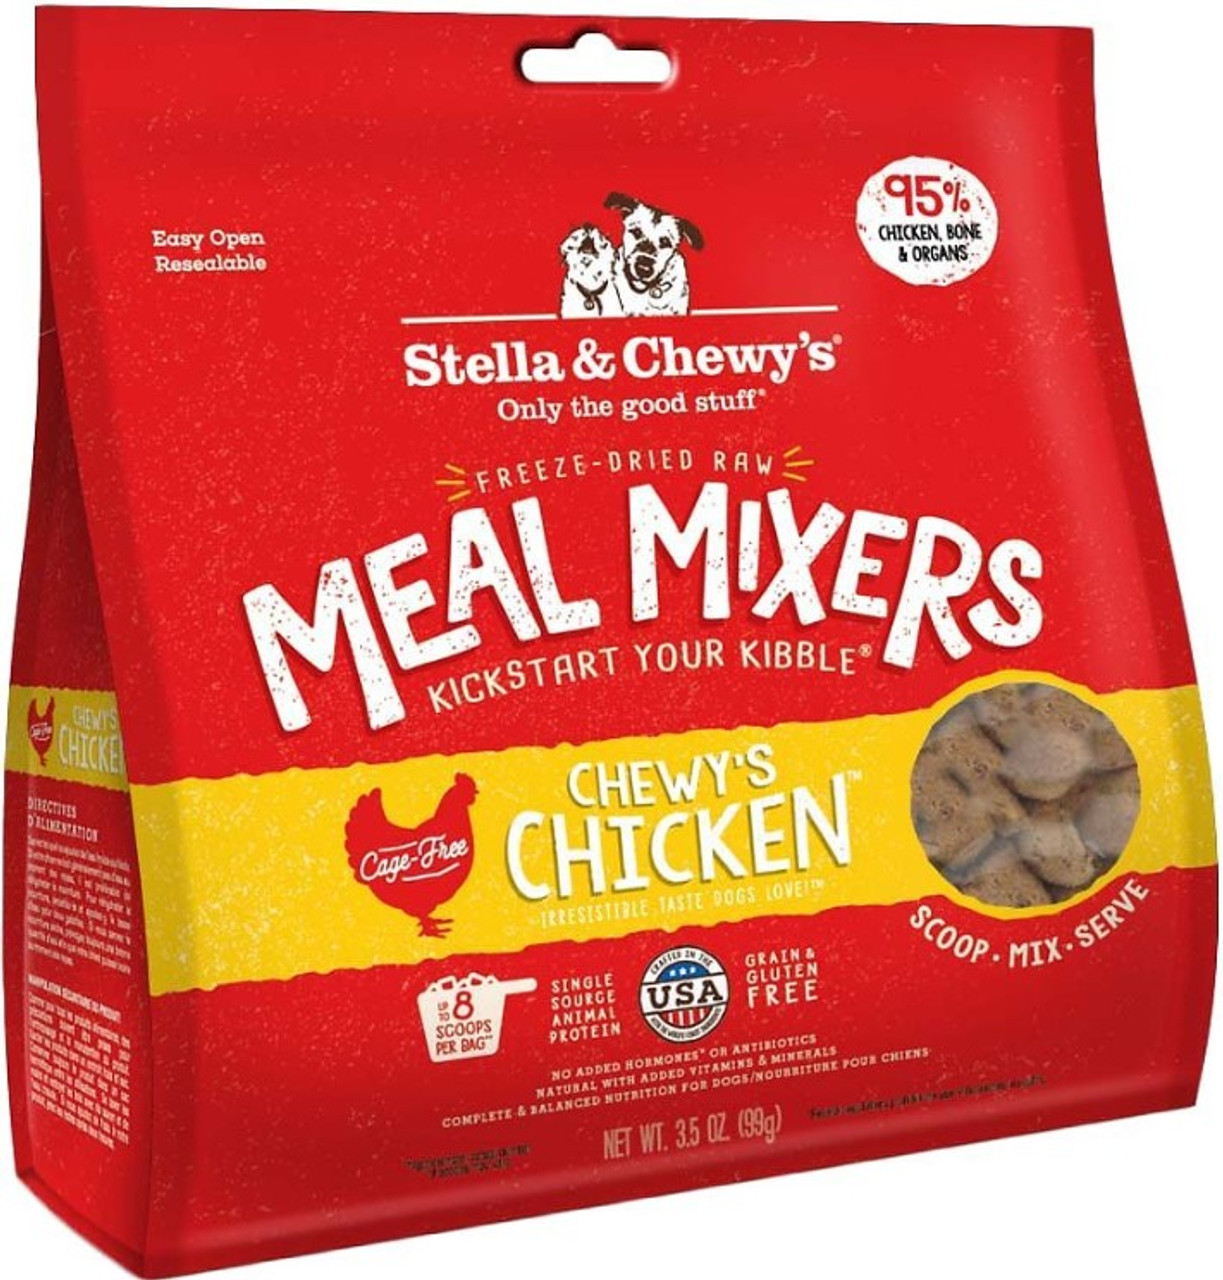 Stella & Chewy's Freeze-Dried Raw Marie's Magical Dinner Dust for Dogs 